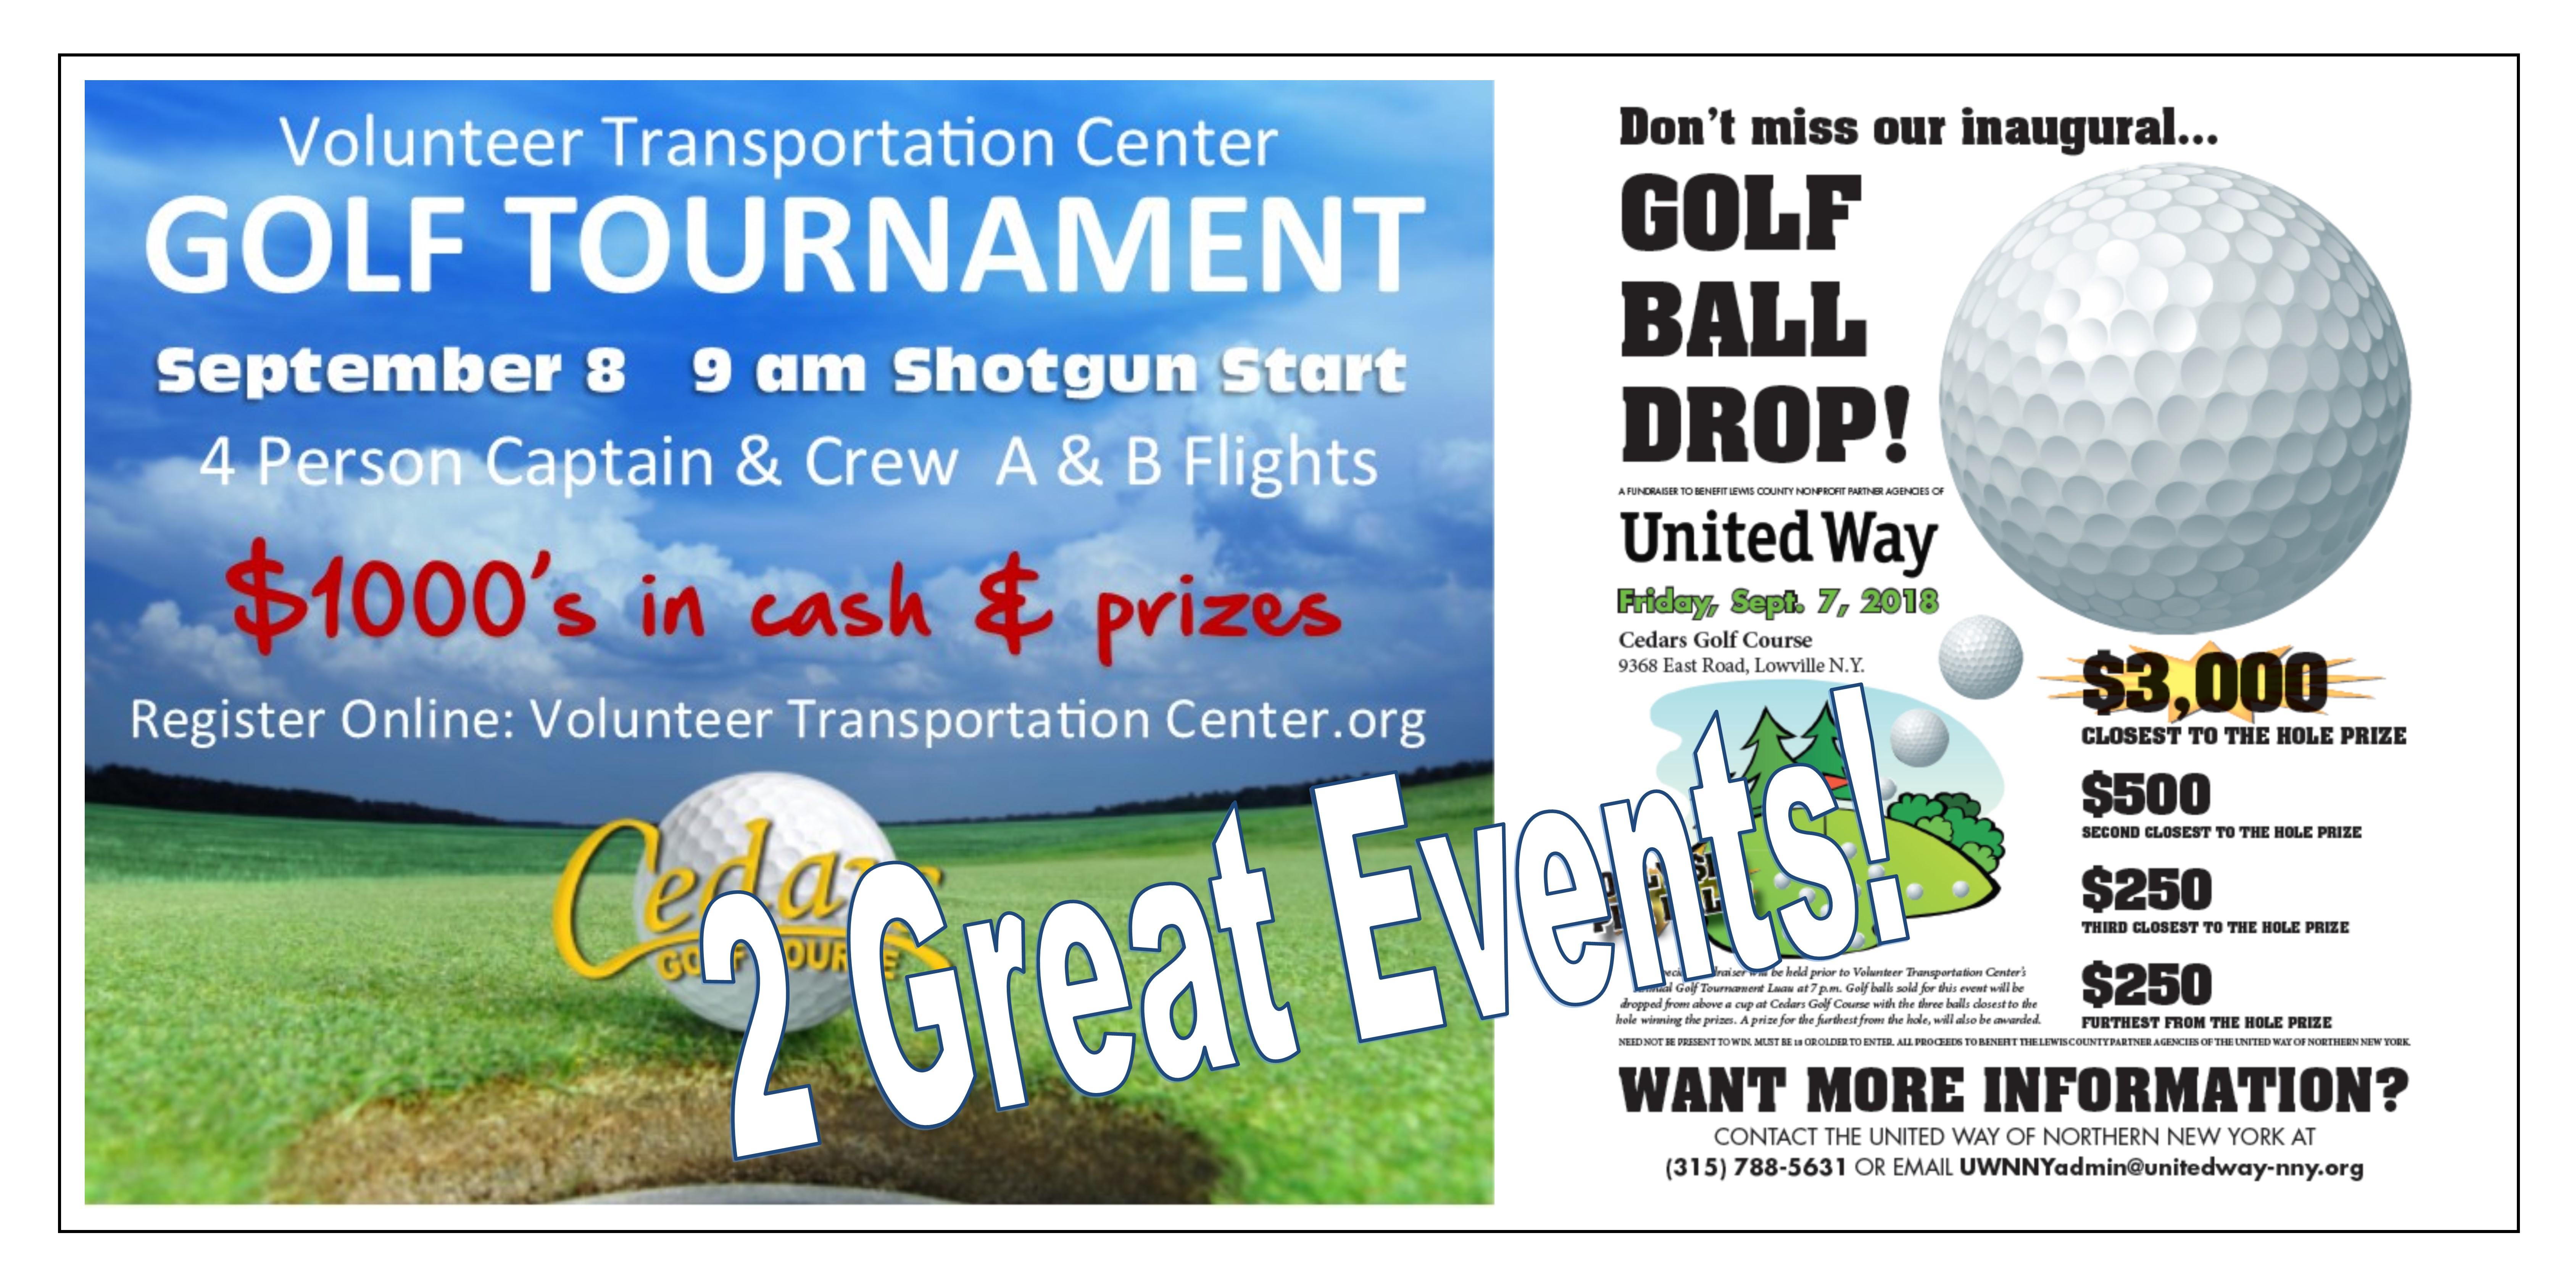 VTC Golf Tournament Dinner and United Way of NNY Golf Ball Drop